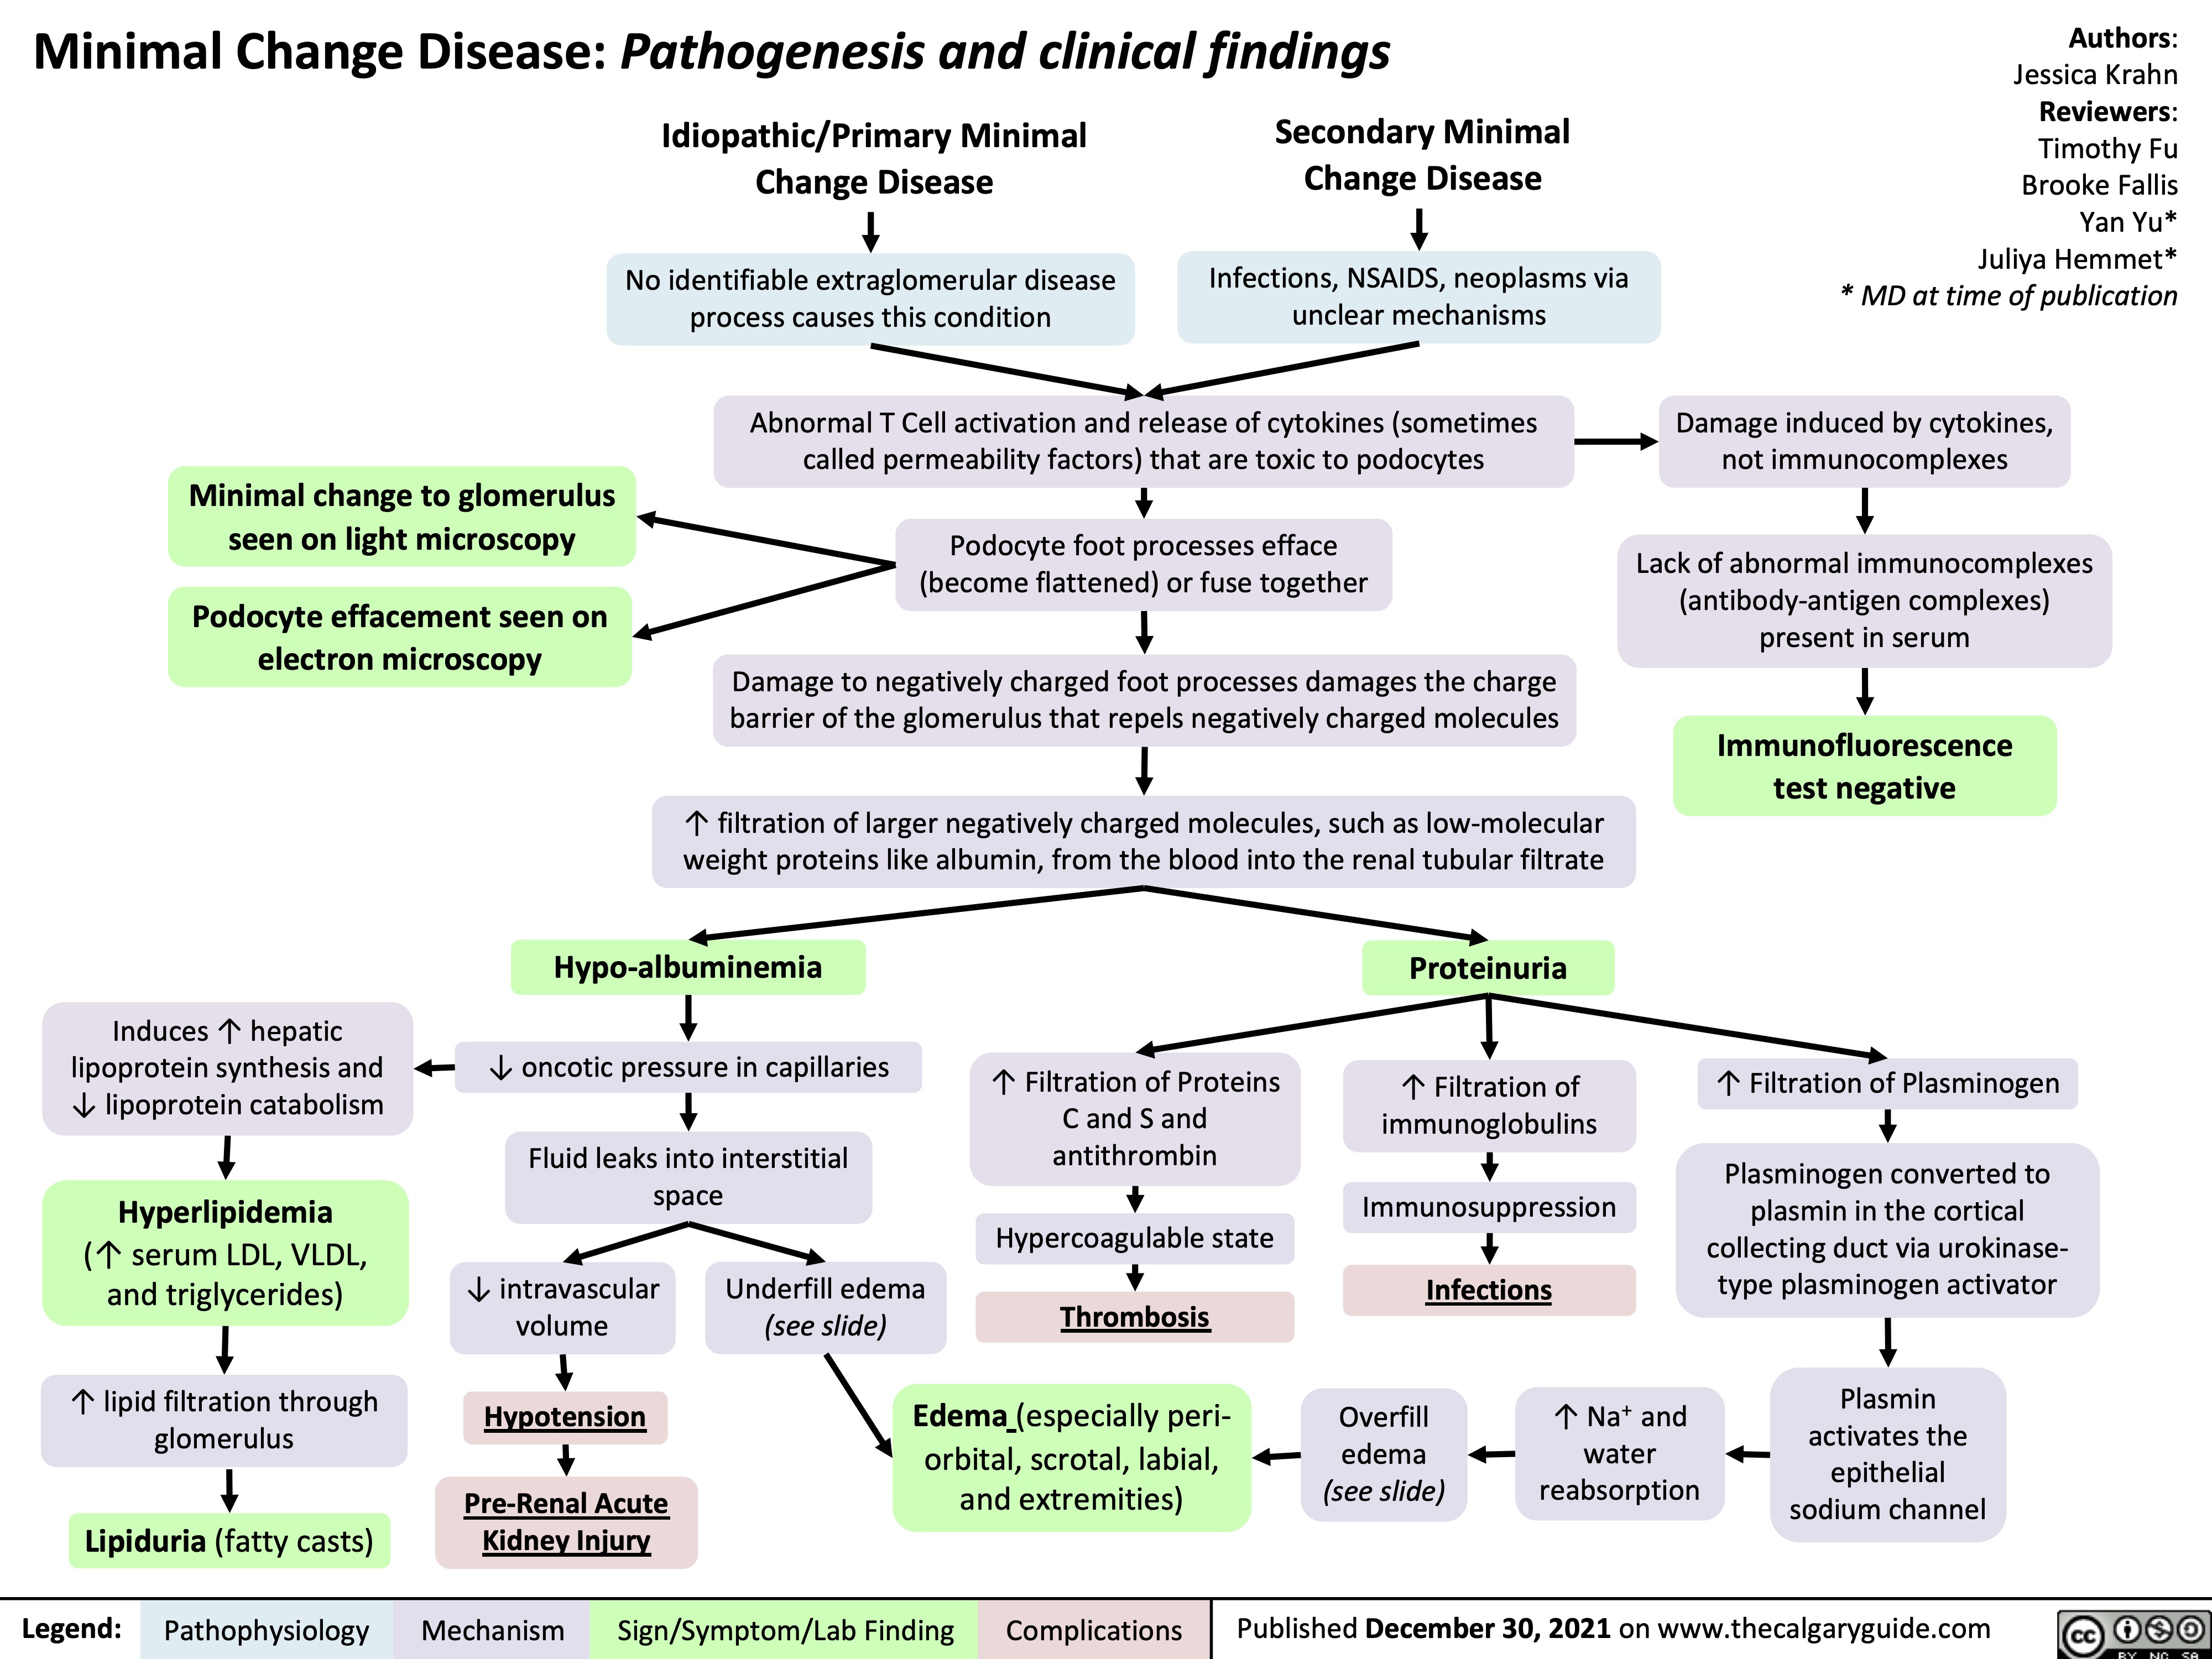 Minimal Change Disease: Pathogenesis and clinical findings
Authors: Jessica Krahn Reviewers: Timothy Fu Brooke Fallis Yan Yu* Juliya Hemmet* * MD at time of publication
Damage induced by cytokines, not immunocomplexes
Lack of abnormal immunocomplexes (antibody-antigen complexes) present in serum
Immunofluorescence test negative
Idiopathic/Primary Minimal Change Disease
No identifiable extraglomerular disease process causes this condition
Secondary Minimal Change Disease
Infections, NSAIDS, neoplasms via unclear mechanisms
       Minimal change to glomerulus seen on light microscopy
Podocyte effacement seen on electron microscopy
Abnormal T Cell activation and release of cytokines (sometimes called permeability factors) that are toxic to podocytes
Podocyte foot processes efface (become flattened) or fuse together
Damage to negatively charged foot processes damages the charge barrier of the glomerulus that repels negatively charged molecules
↑ filtration of larger negatively charged molecules, such as low-molecular weight proteins like albumin, from the blood into the renal tubular filtrate
              Induces ↑ hepatic lipoprotein synthesis and ↓ lipoprotein catabolism
Hyperlipidemia
(↑ serum LDL, VLDL, and triglycerides)
↑ lipid filtration through glomerulus
Lipiduria (fatty casts)
Hypo-albuminemia
↓ oncotic pressure in capillaries
Fluid leaks into interstitial space
↑ Filtration of Proteins C and S and antithrombin
Hypercoagulable state
Proteinuria
↑ Filtration of immunoglobulins
Immunosuppression
Infections
↑ Filtration of Plasminogen
Plasminogen converted to plasmin in the cortical collecting duct via urokinase- type plasminogen activator
Plasmin activates the epithelial sodium channel
             ↓ intravascular volume
Hypotension
Pre-Renal Acute Kidney Injury
Underfill edema
  (see slide)
Thrombosis Edema (especially peri-
orbital, scrotal, labial, and extremities)
        Overfill
edema
(see slide)
↑ Na+ and water reabsorption
    Legend:
 Pathophysiology
Mechanism
Sign/Symptom/Lab Finding
 Complications
Published December 30, 2021 on www.thecalgaryguide.com
    